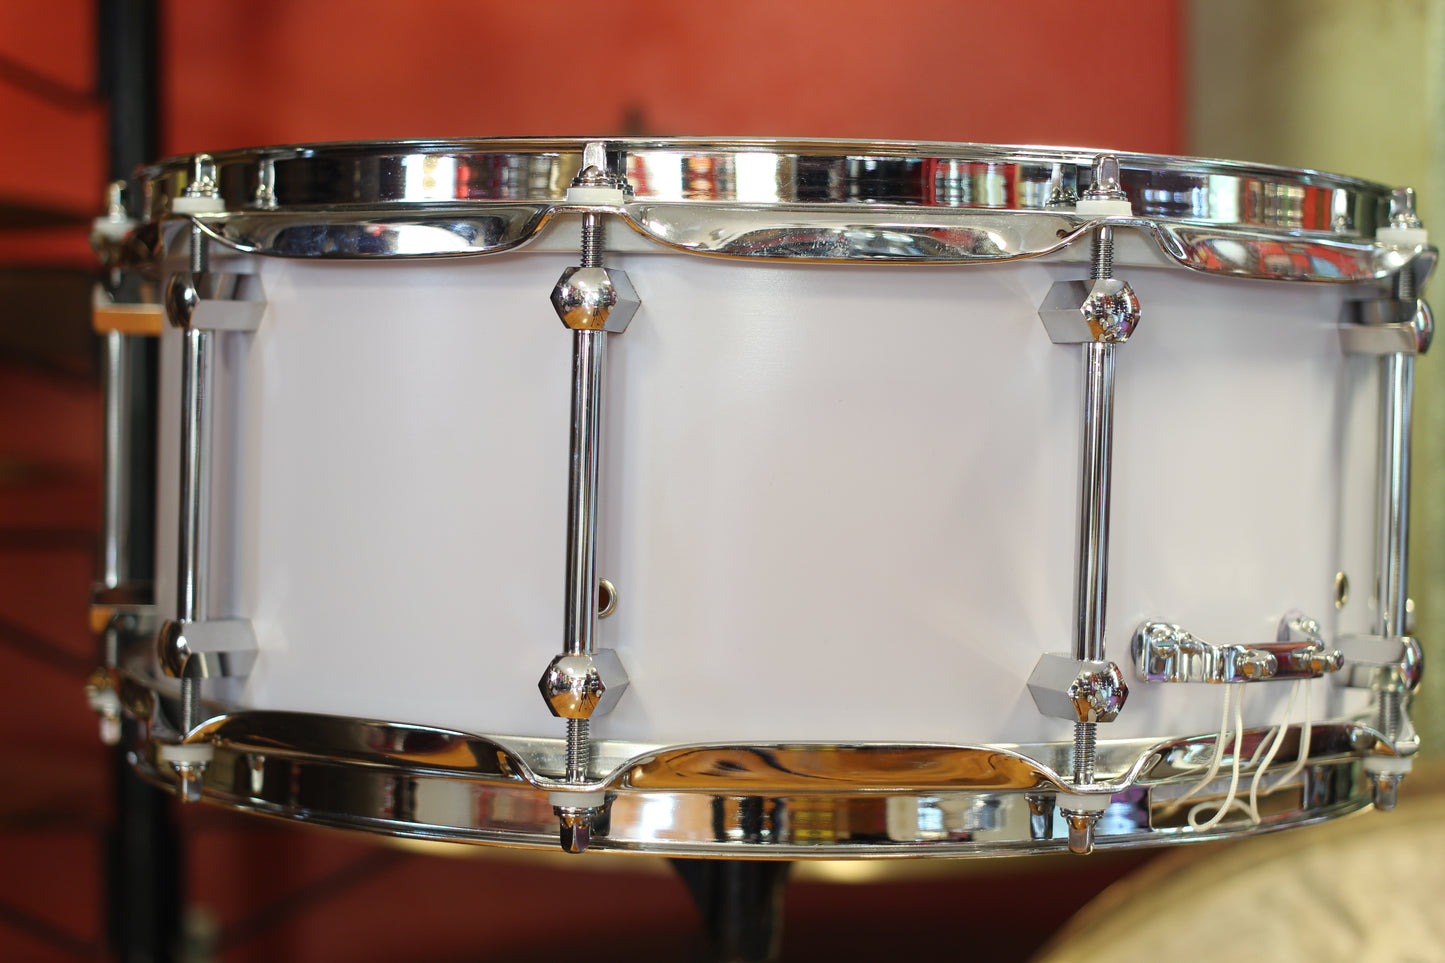 Noble & Cooley Horizon Snare Drum 6"x14" in Pastel Purple